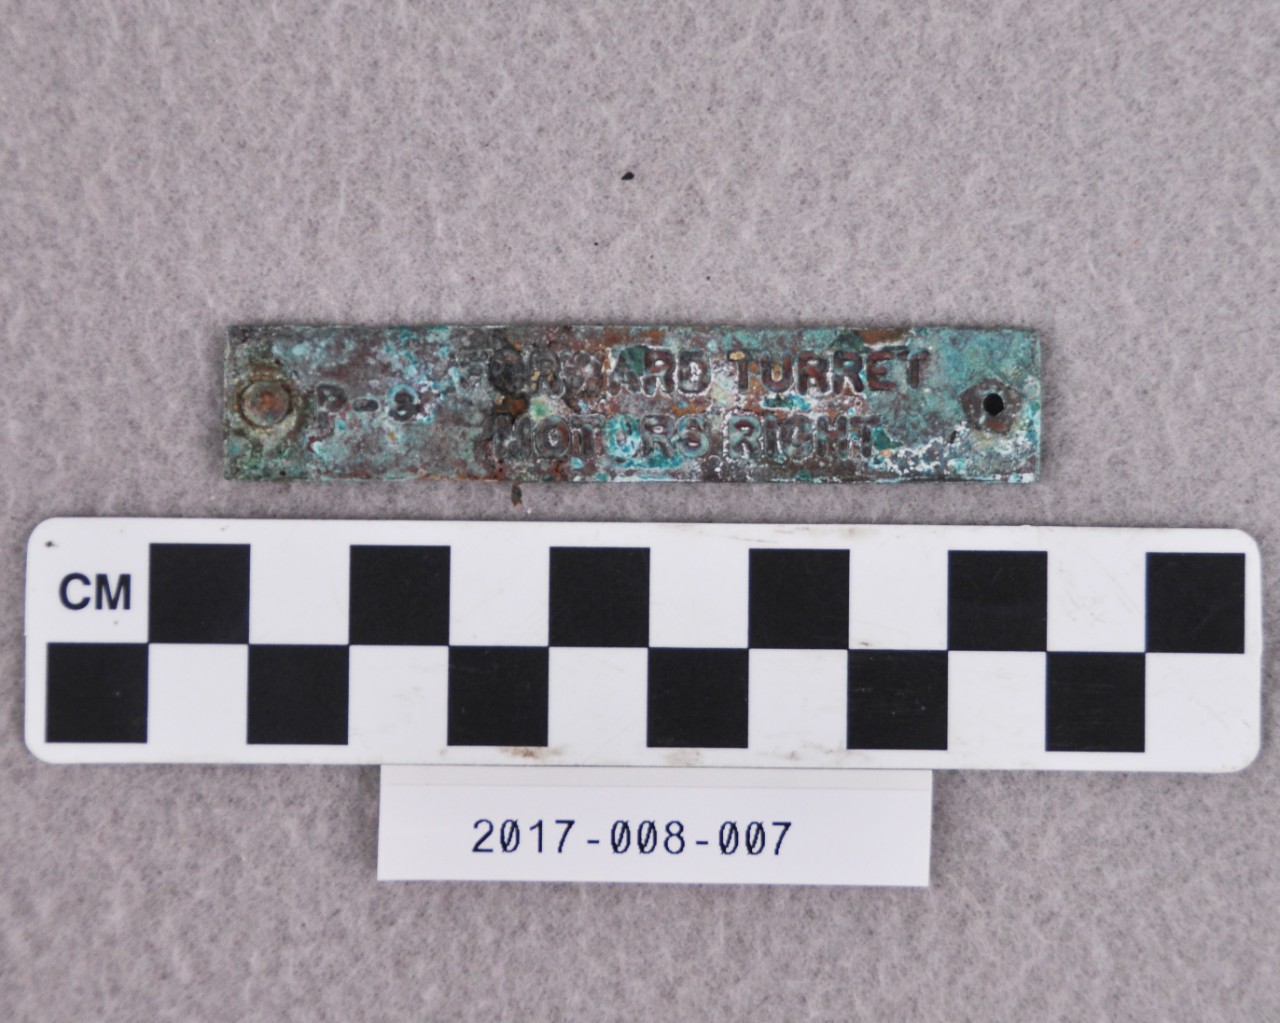 <p>A small, rectangular strip of brass covered in white, green, and red corrosion. There is a hole through one end and a rivet through the other. There is text stamped on the face that reads “P-9 FORWARD TURRET MOTORS RIGHT”.</p>